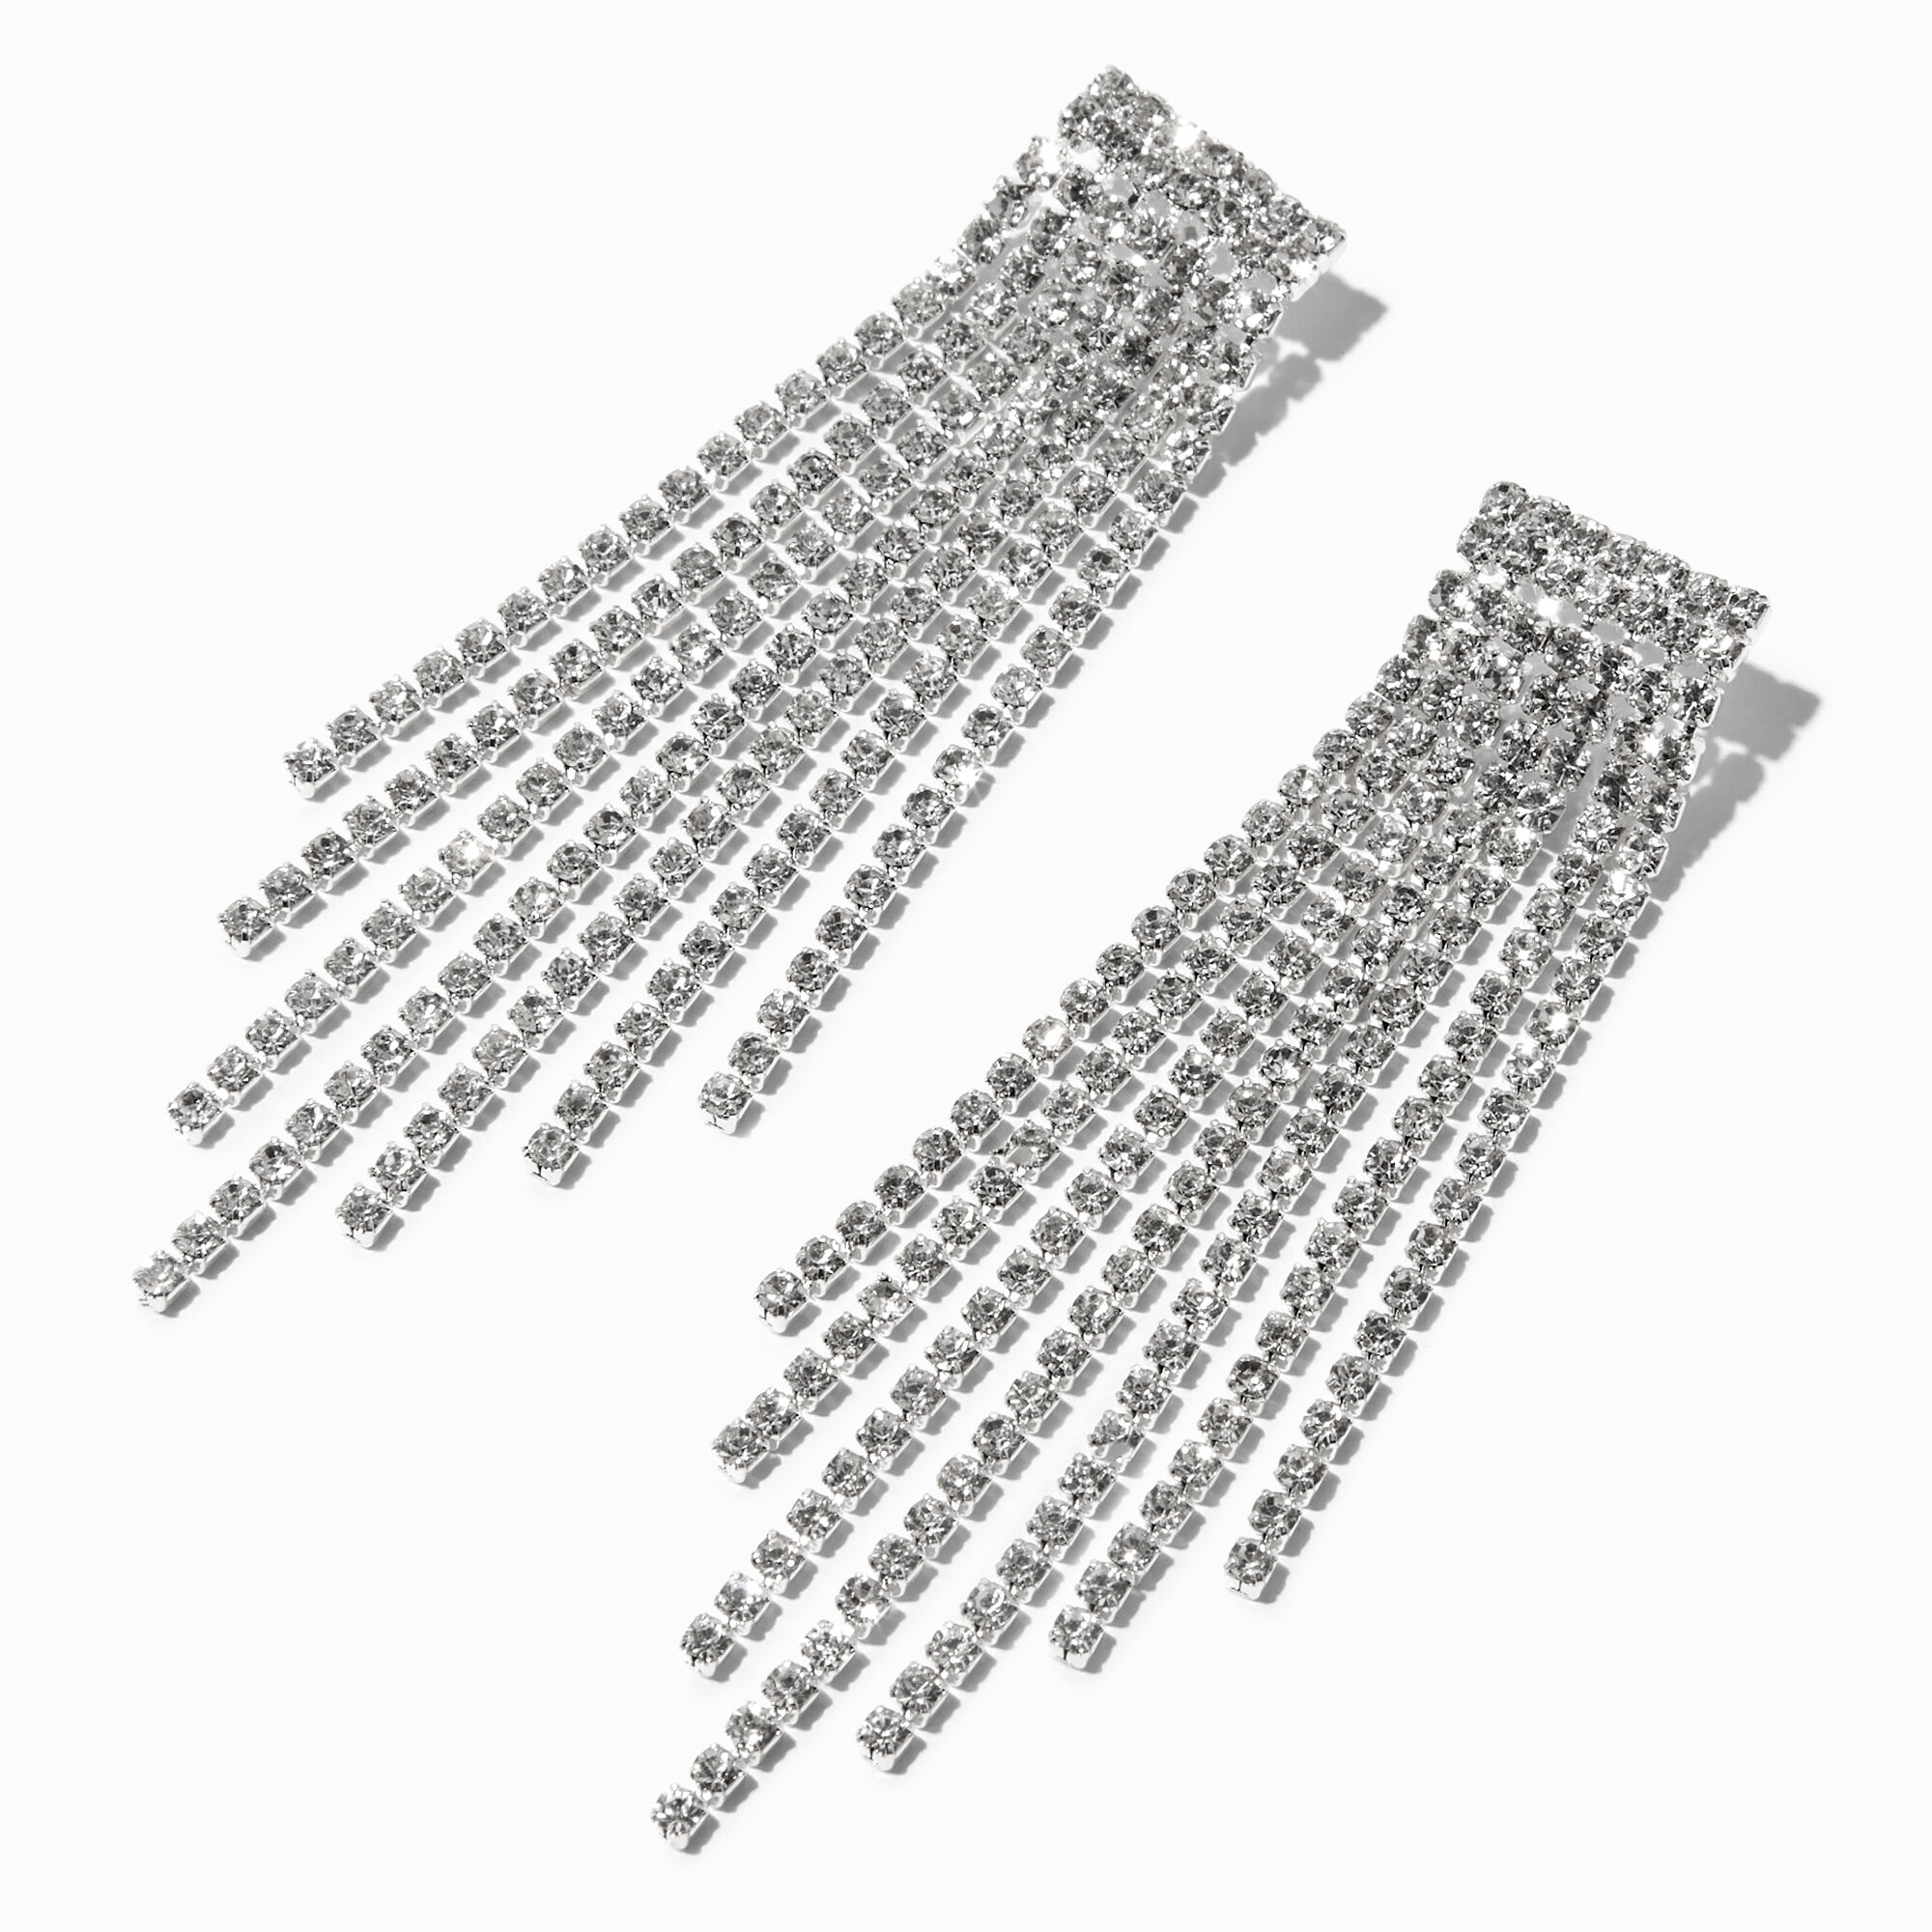 View Claires Rhinestone 3 Pyramid Fringe Drop Earrings Silver information